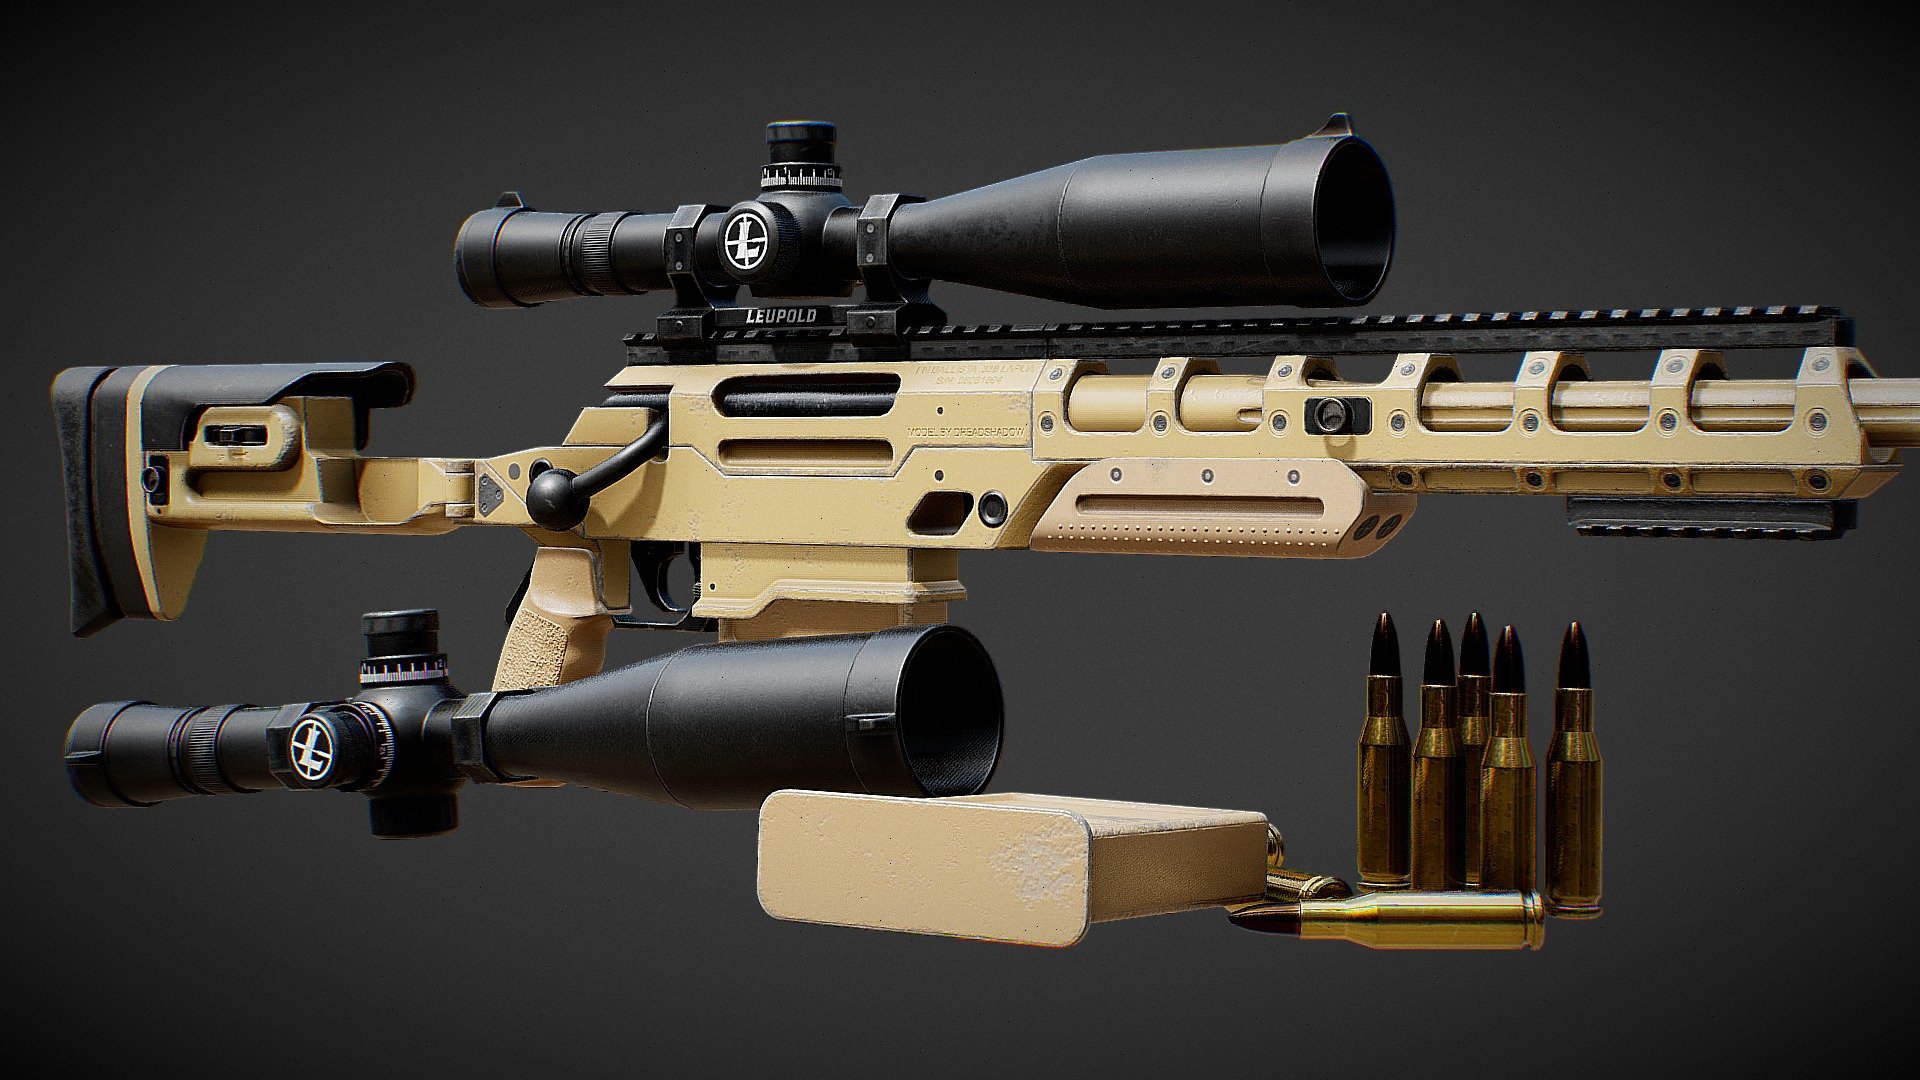 The FN Ballista is a sniper rifle developed by FN Herstal.

Modeled in Blender, Textured in Substance Painter 3d model